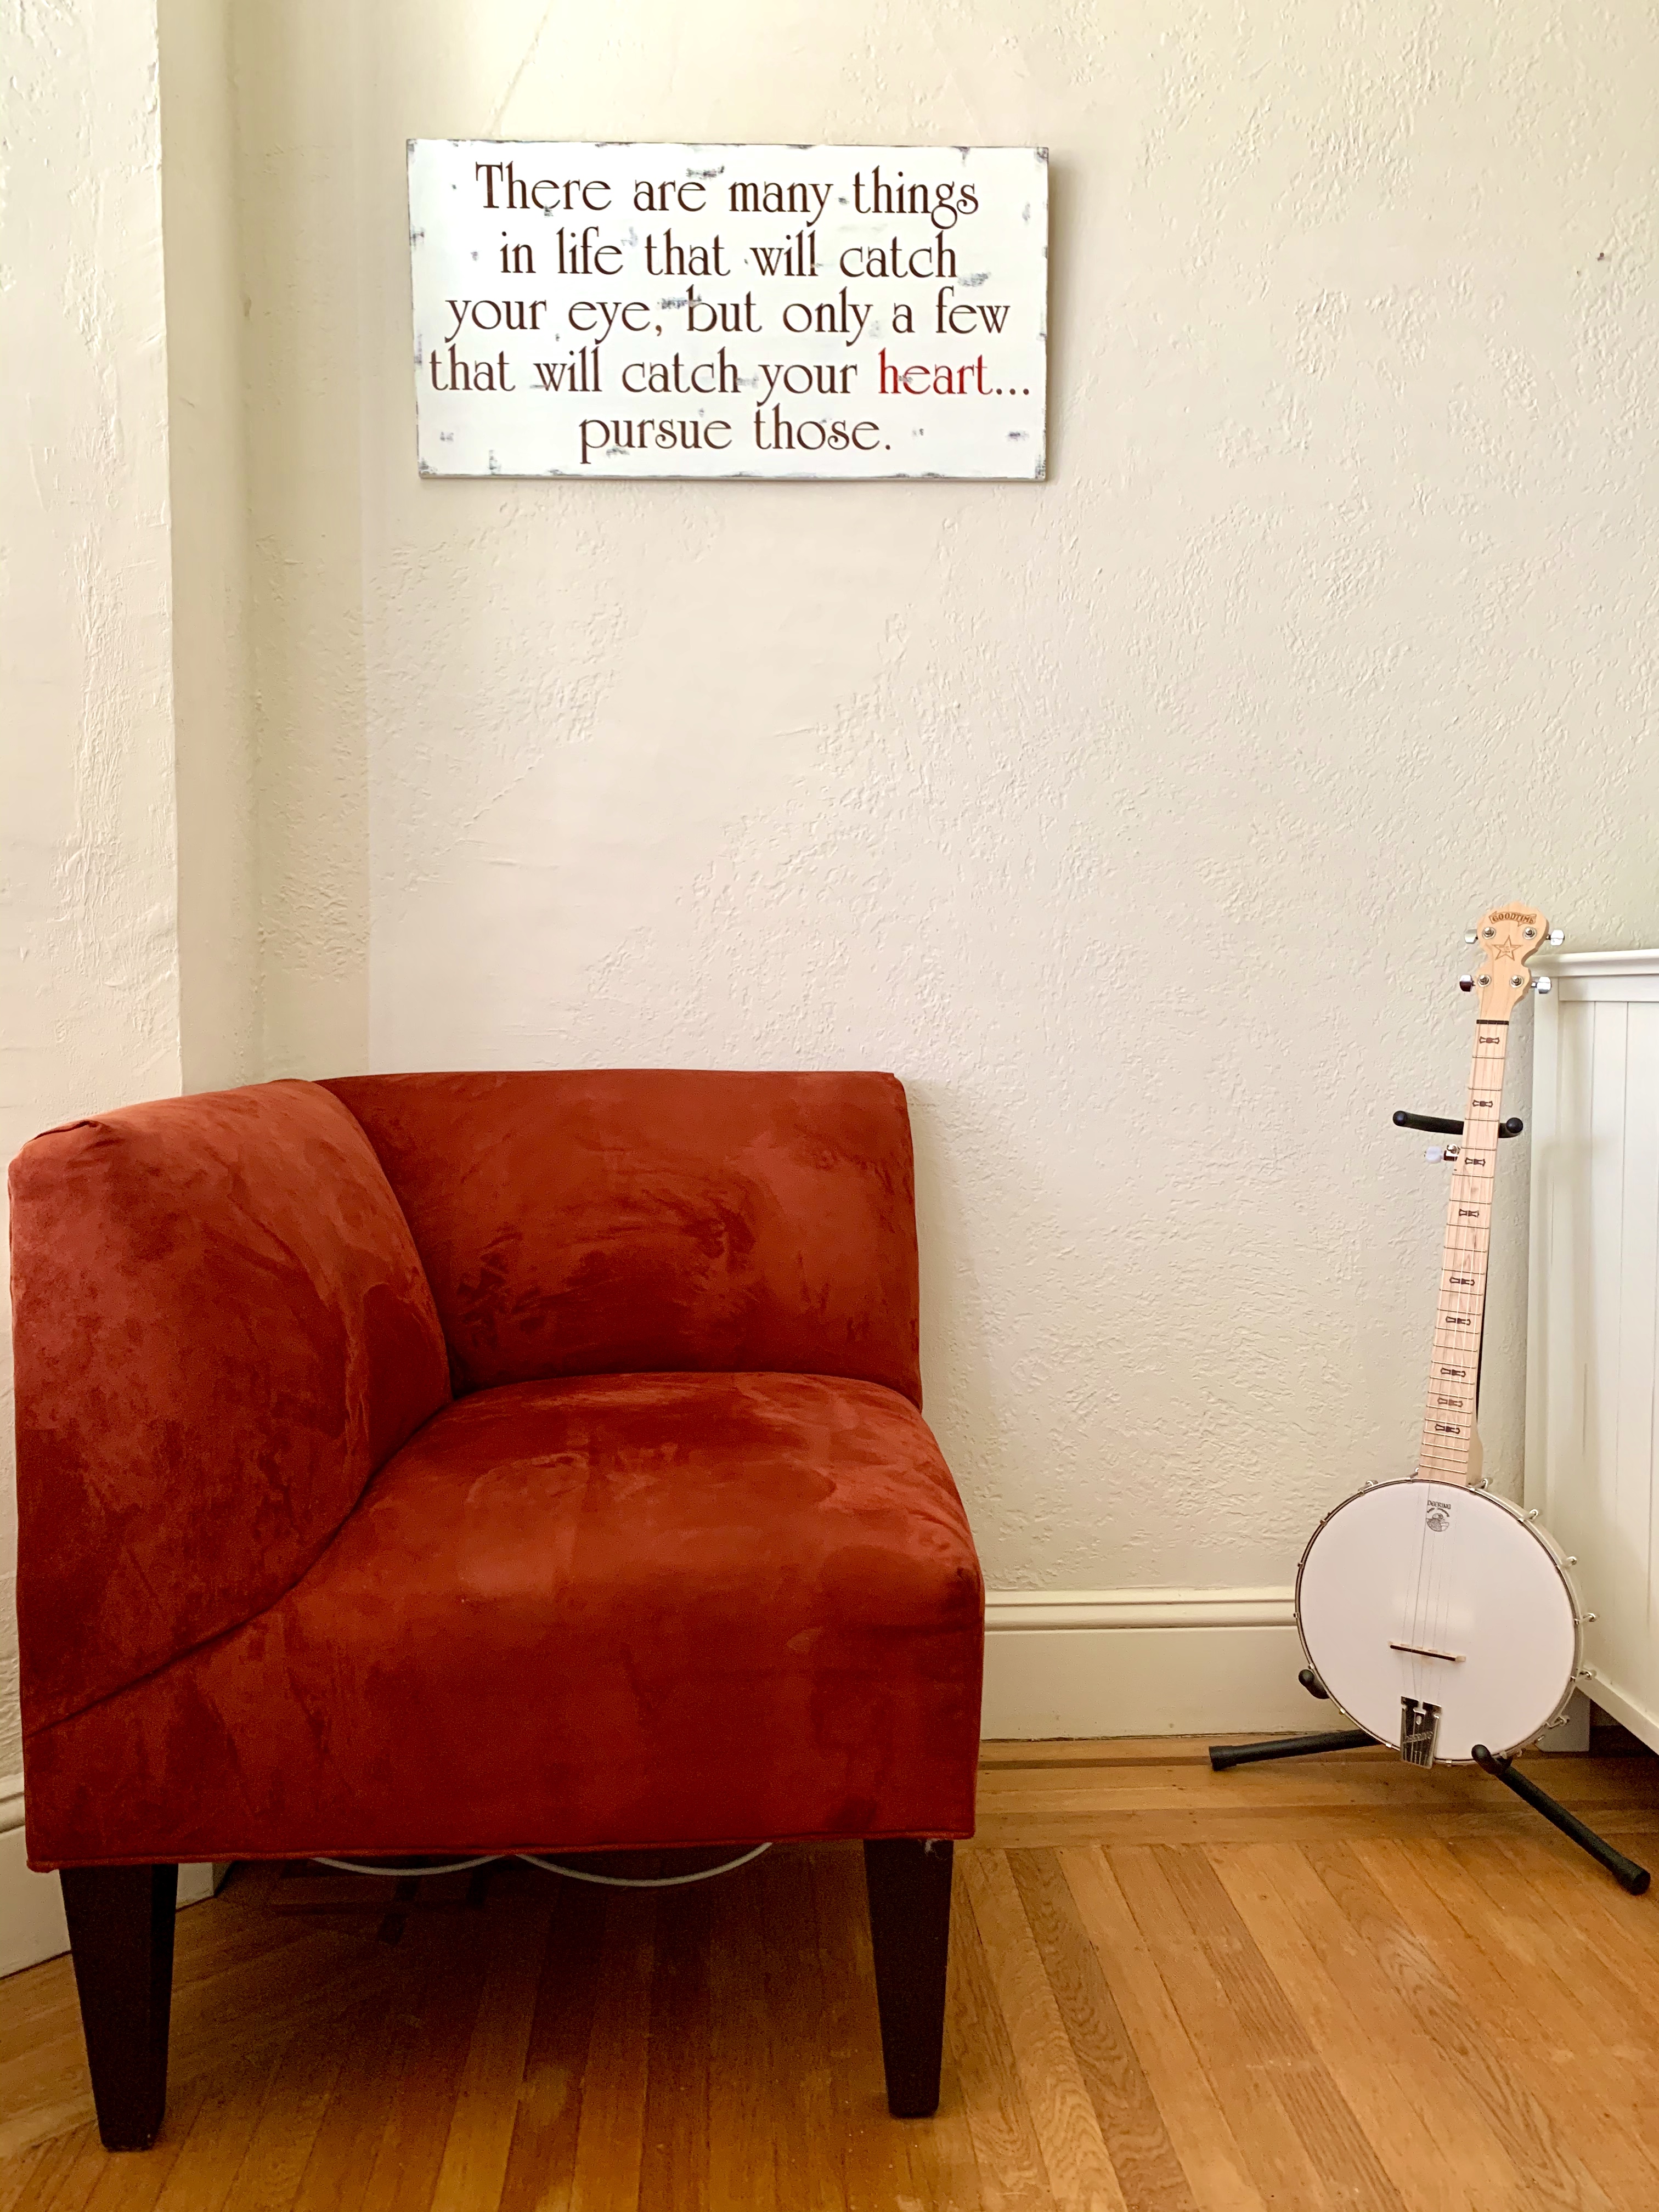 Picture of empty chair and banjo